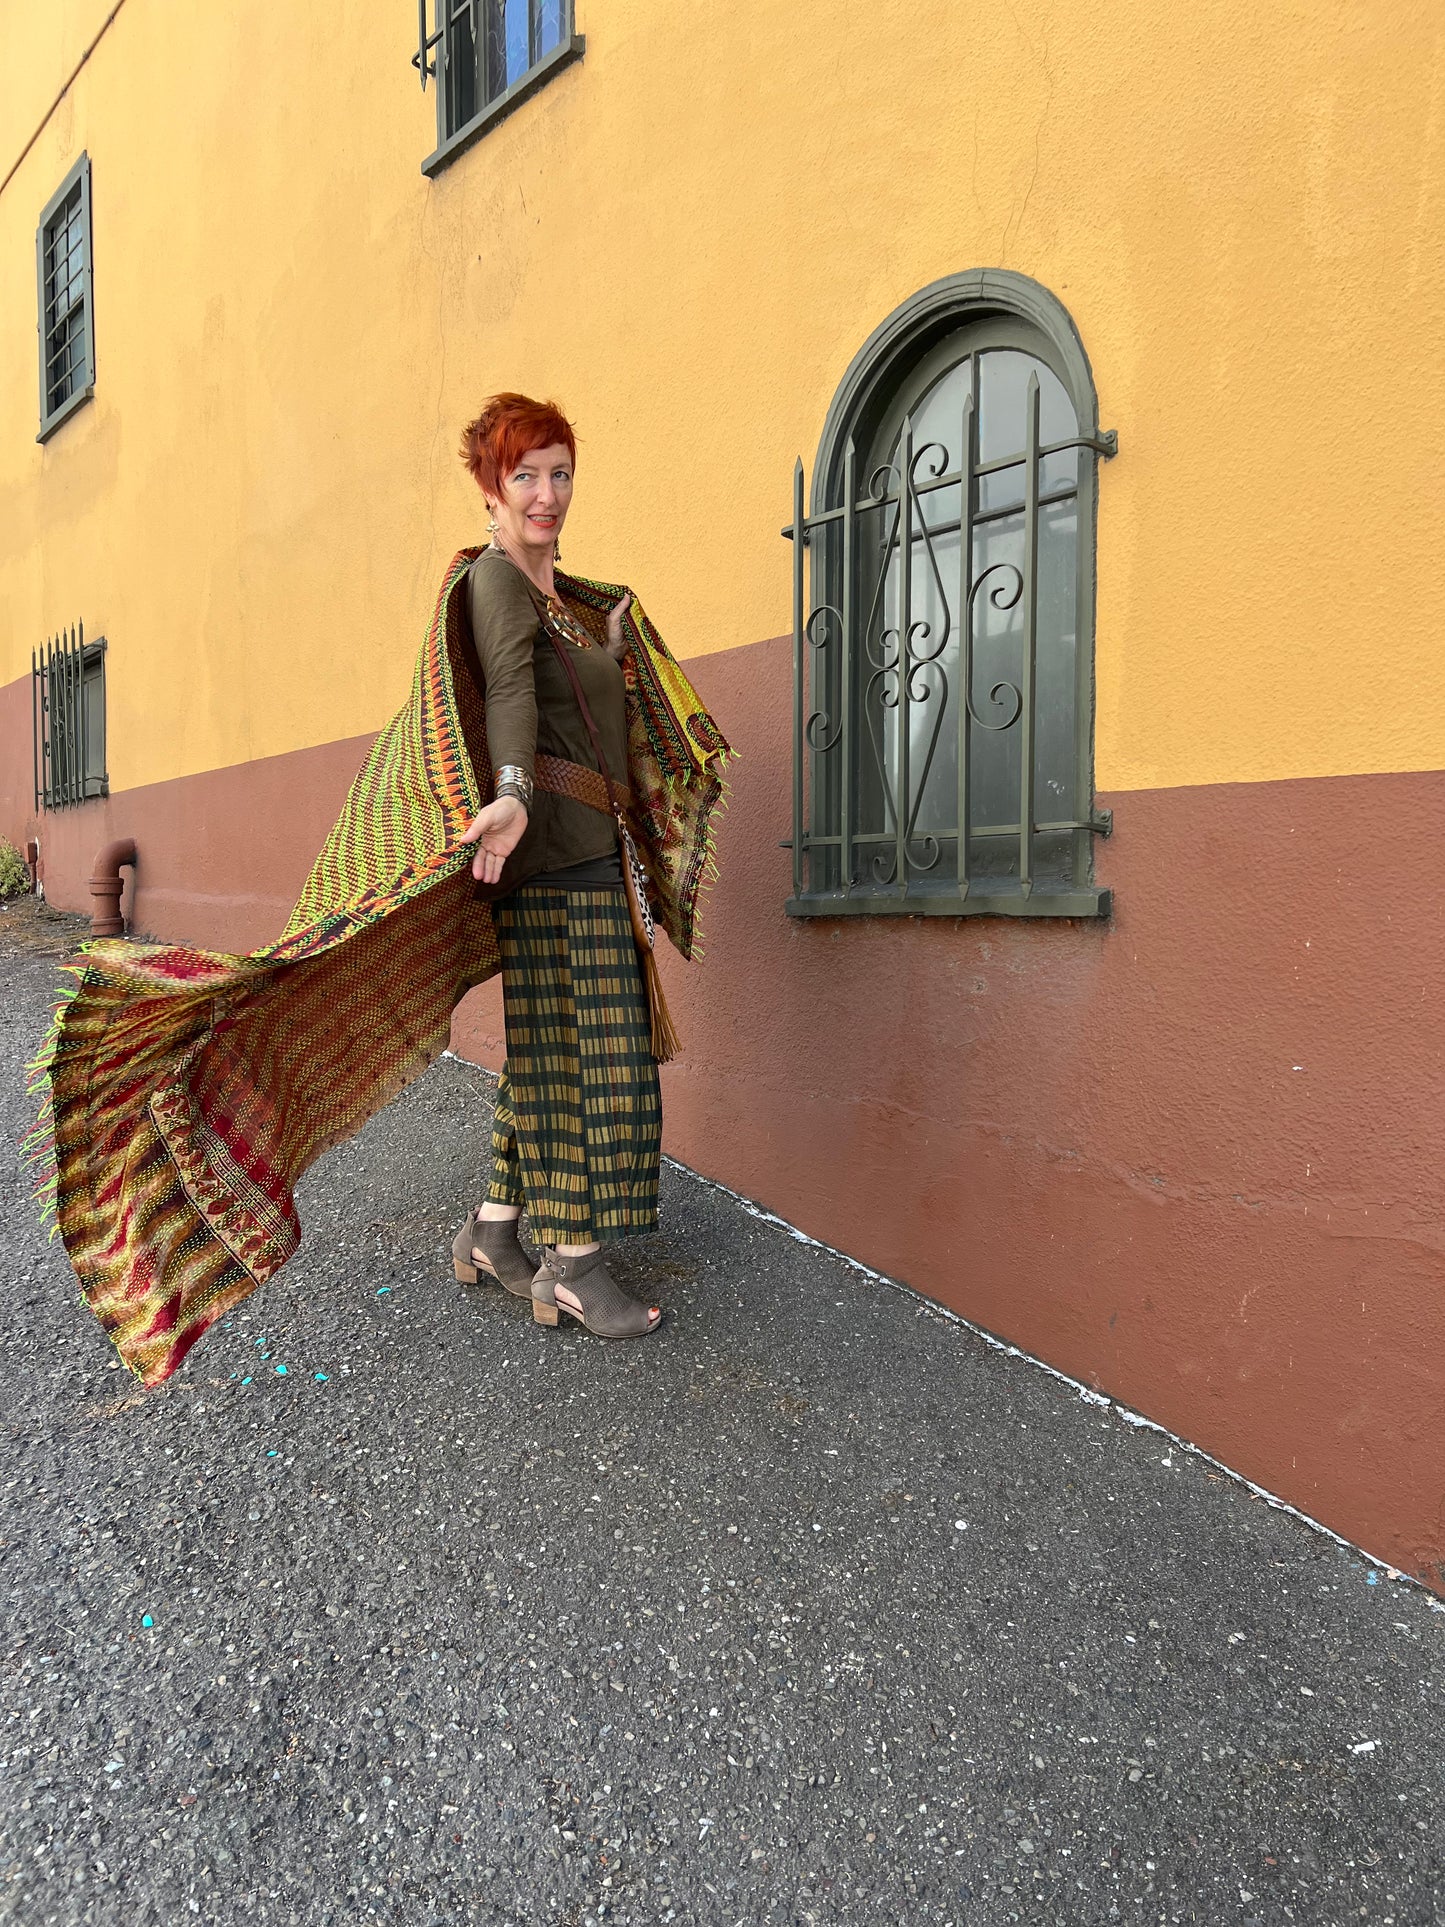 REVERSIBLE HAND-QUILTED SILK SHAWL: AUTUMN PALETTE